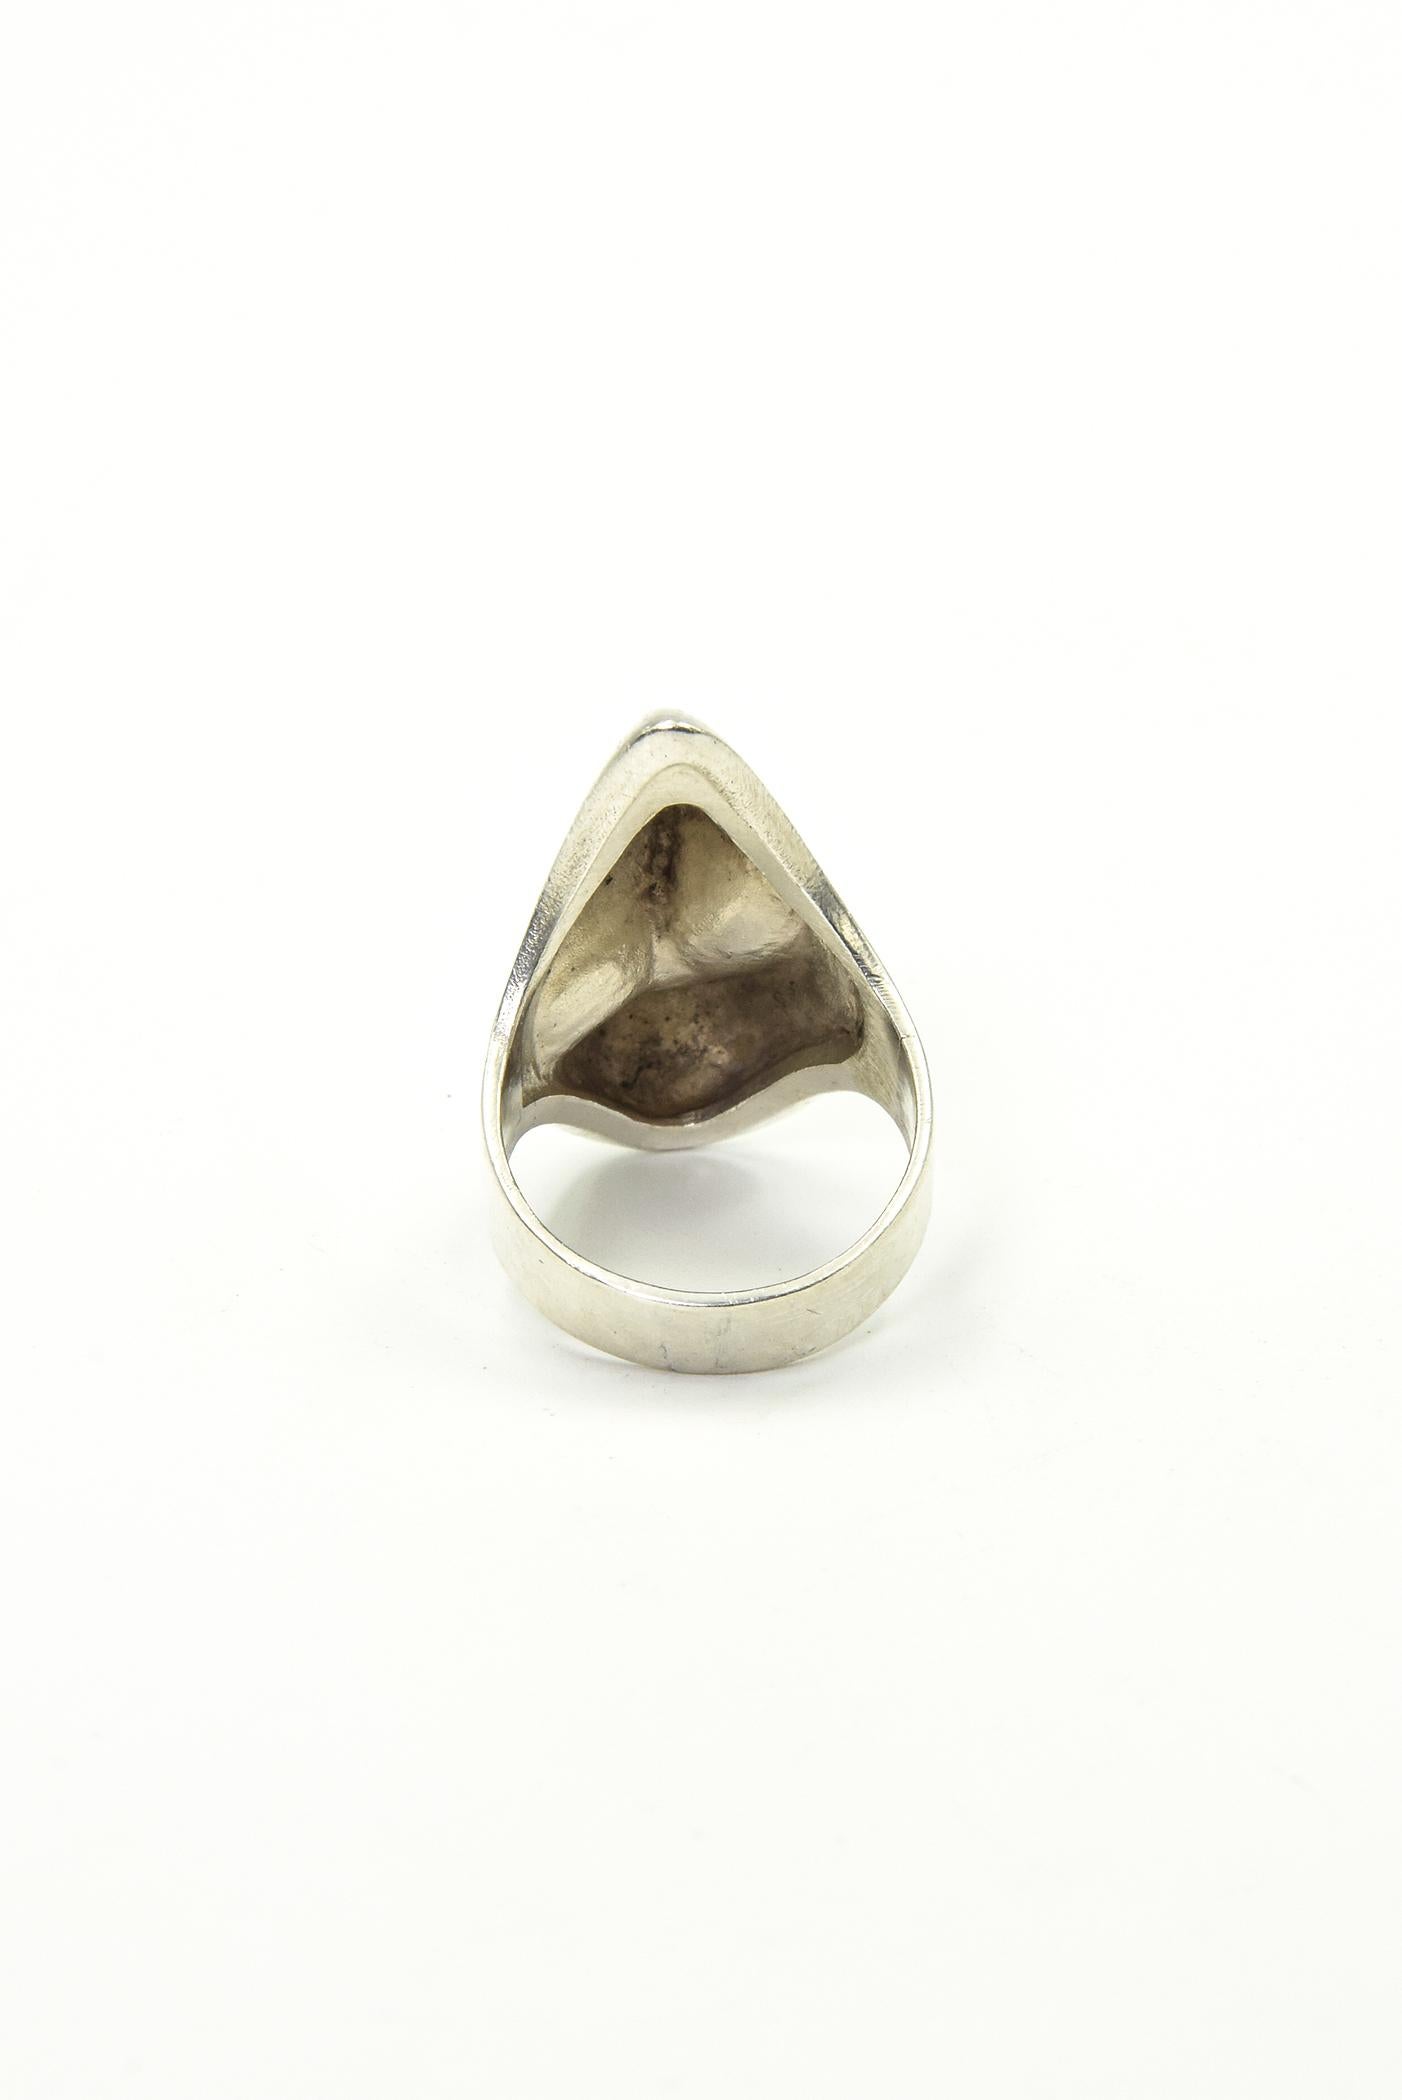 Lapponia Sterling Silver Abstract Ring by Björn Weckström For Sale 2